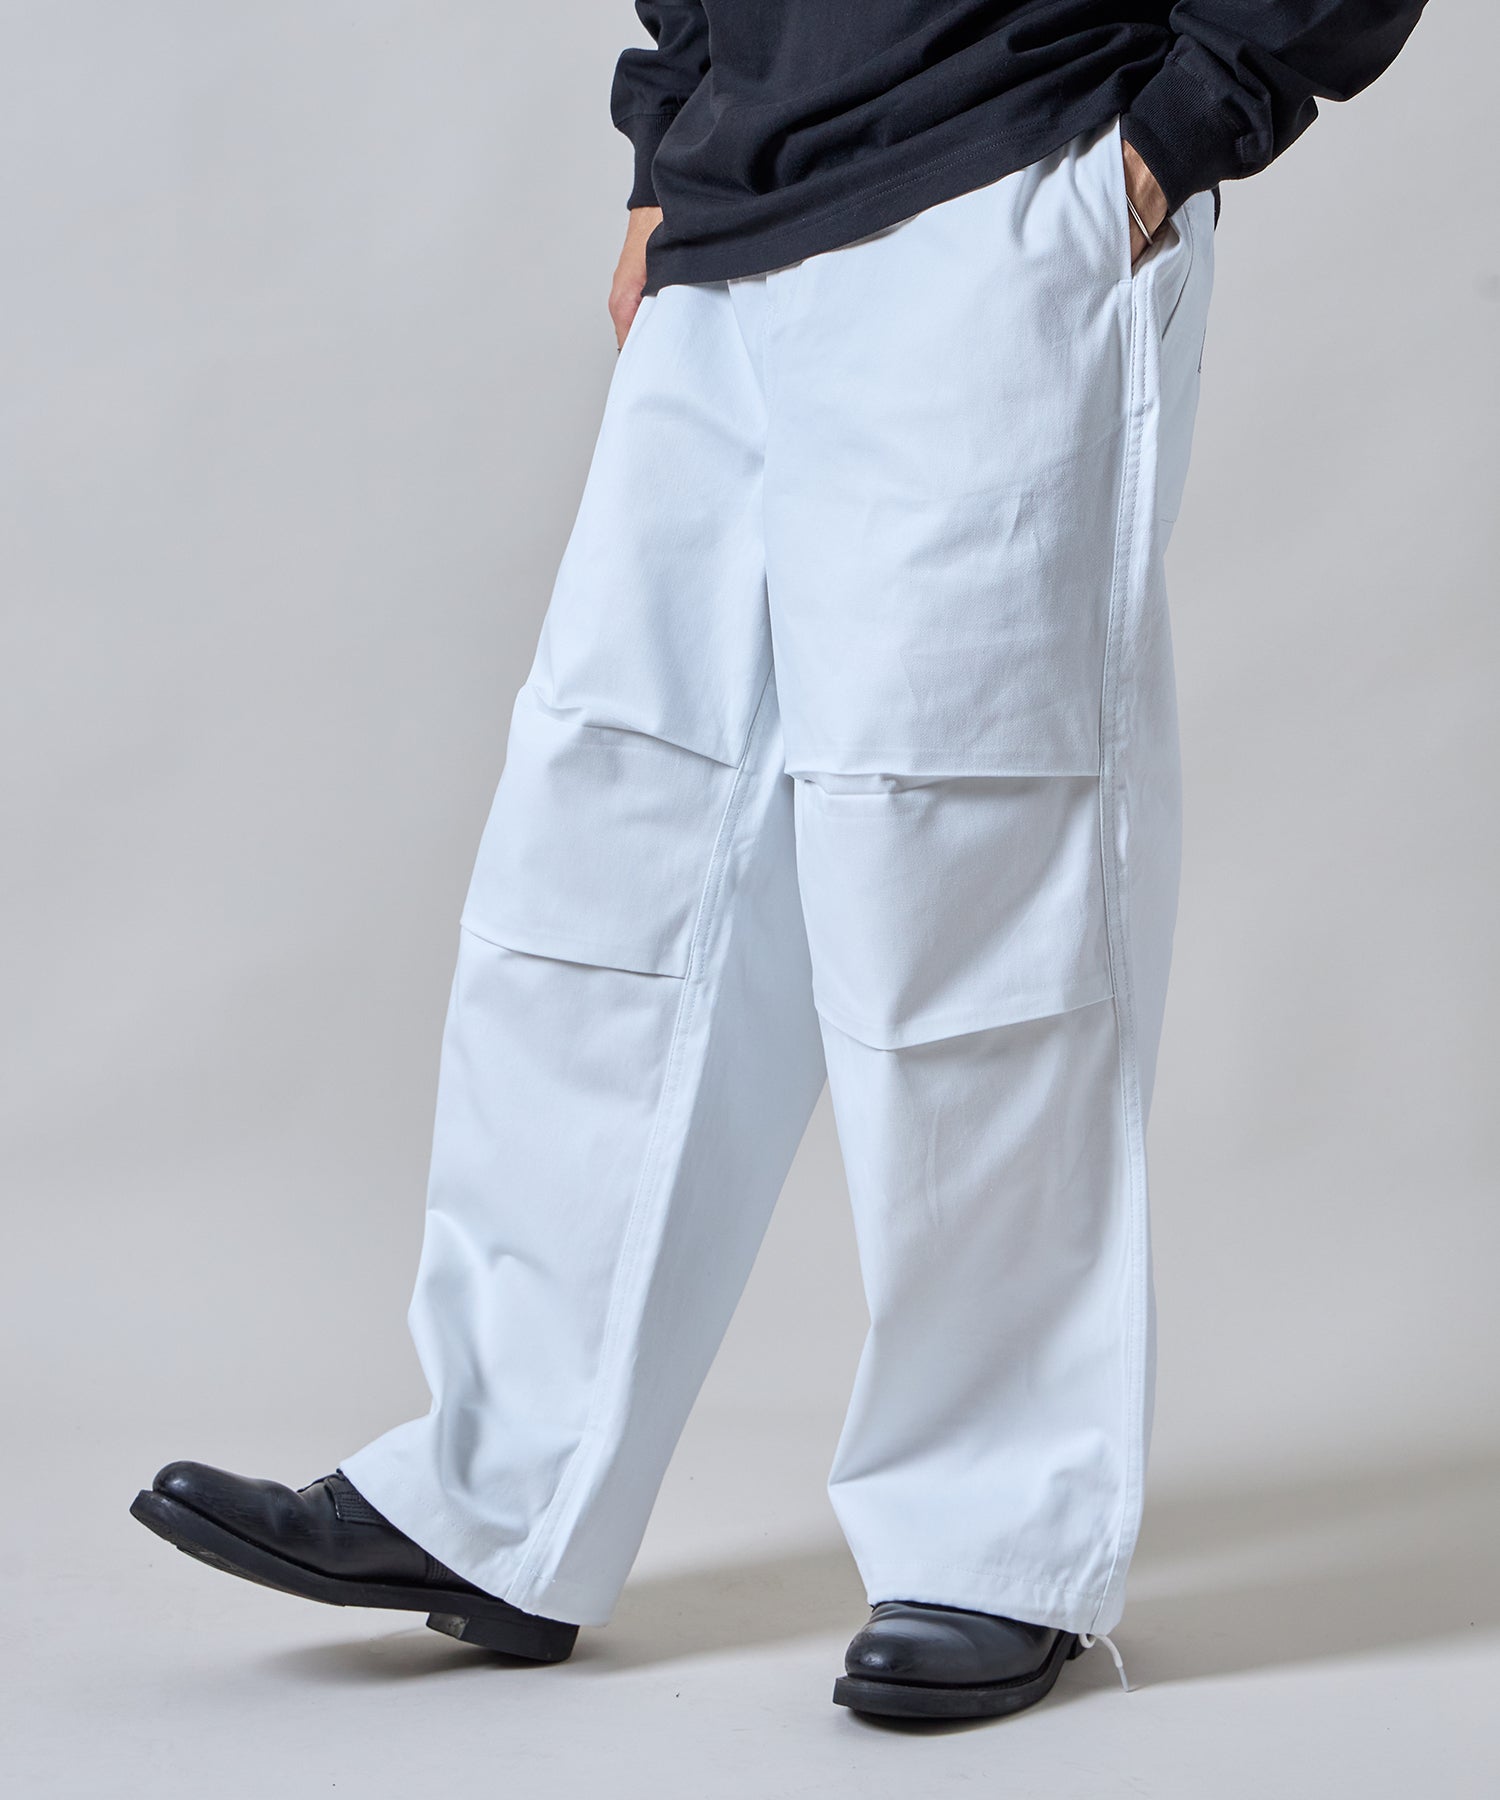 SNOW WORKERS PANTS / ルーズシルエット ワーク カラースノーパンツ ホワイト